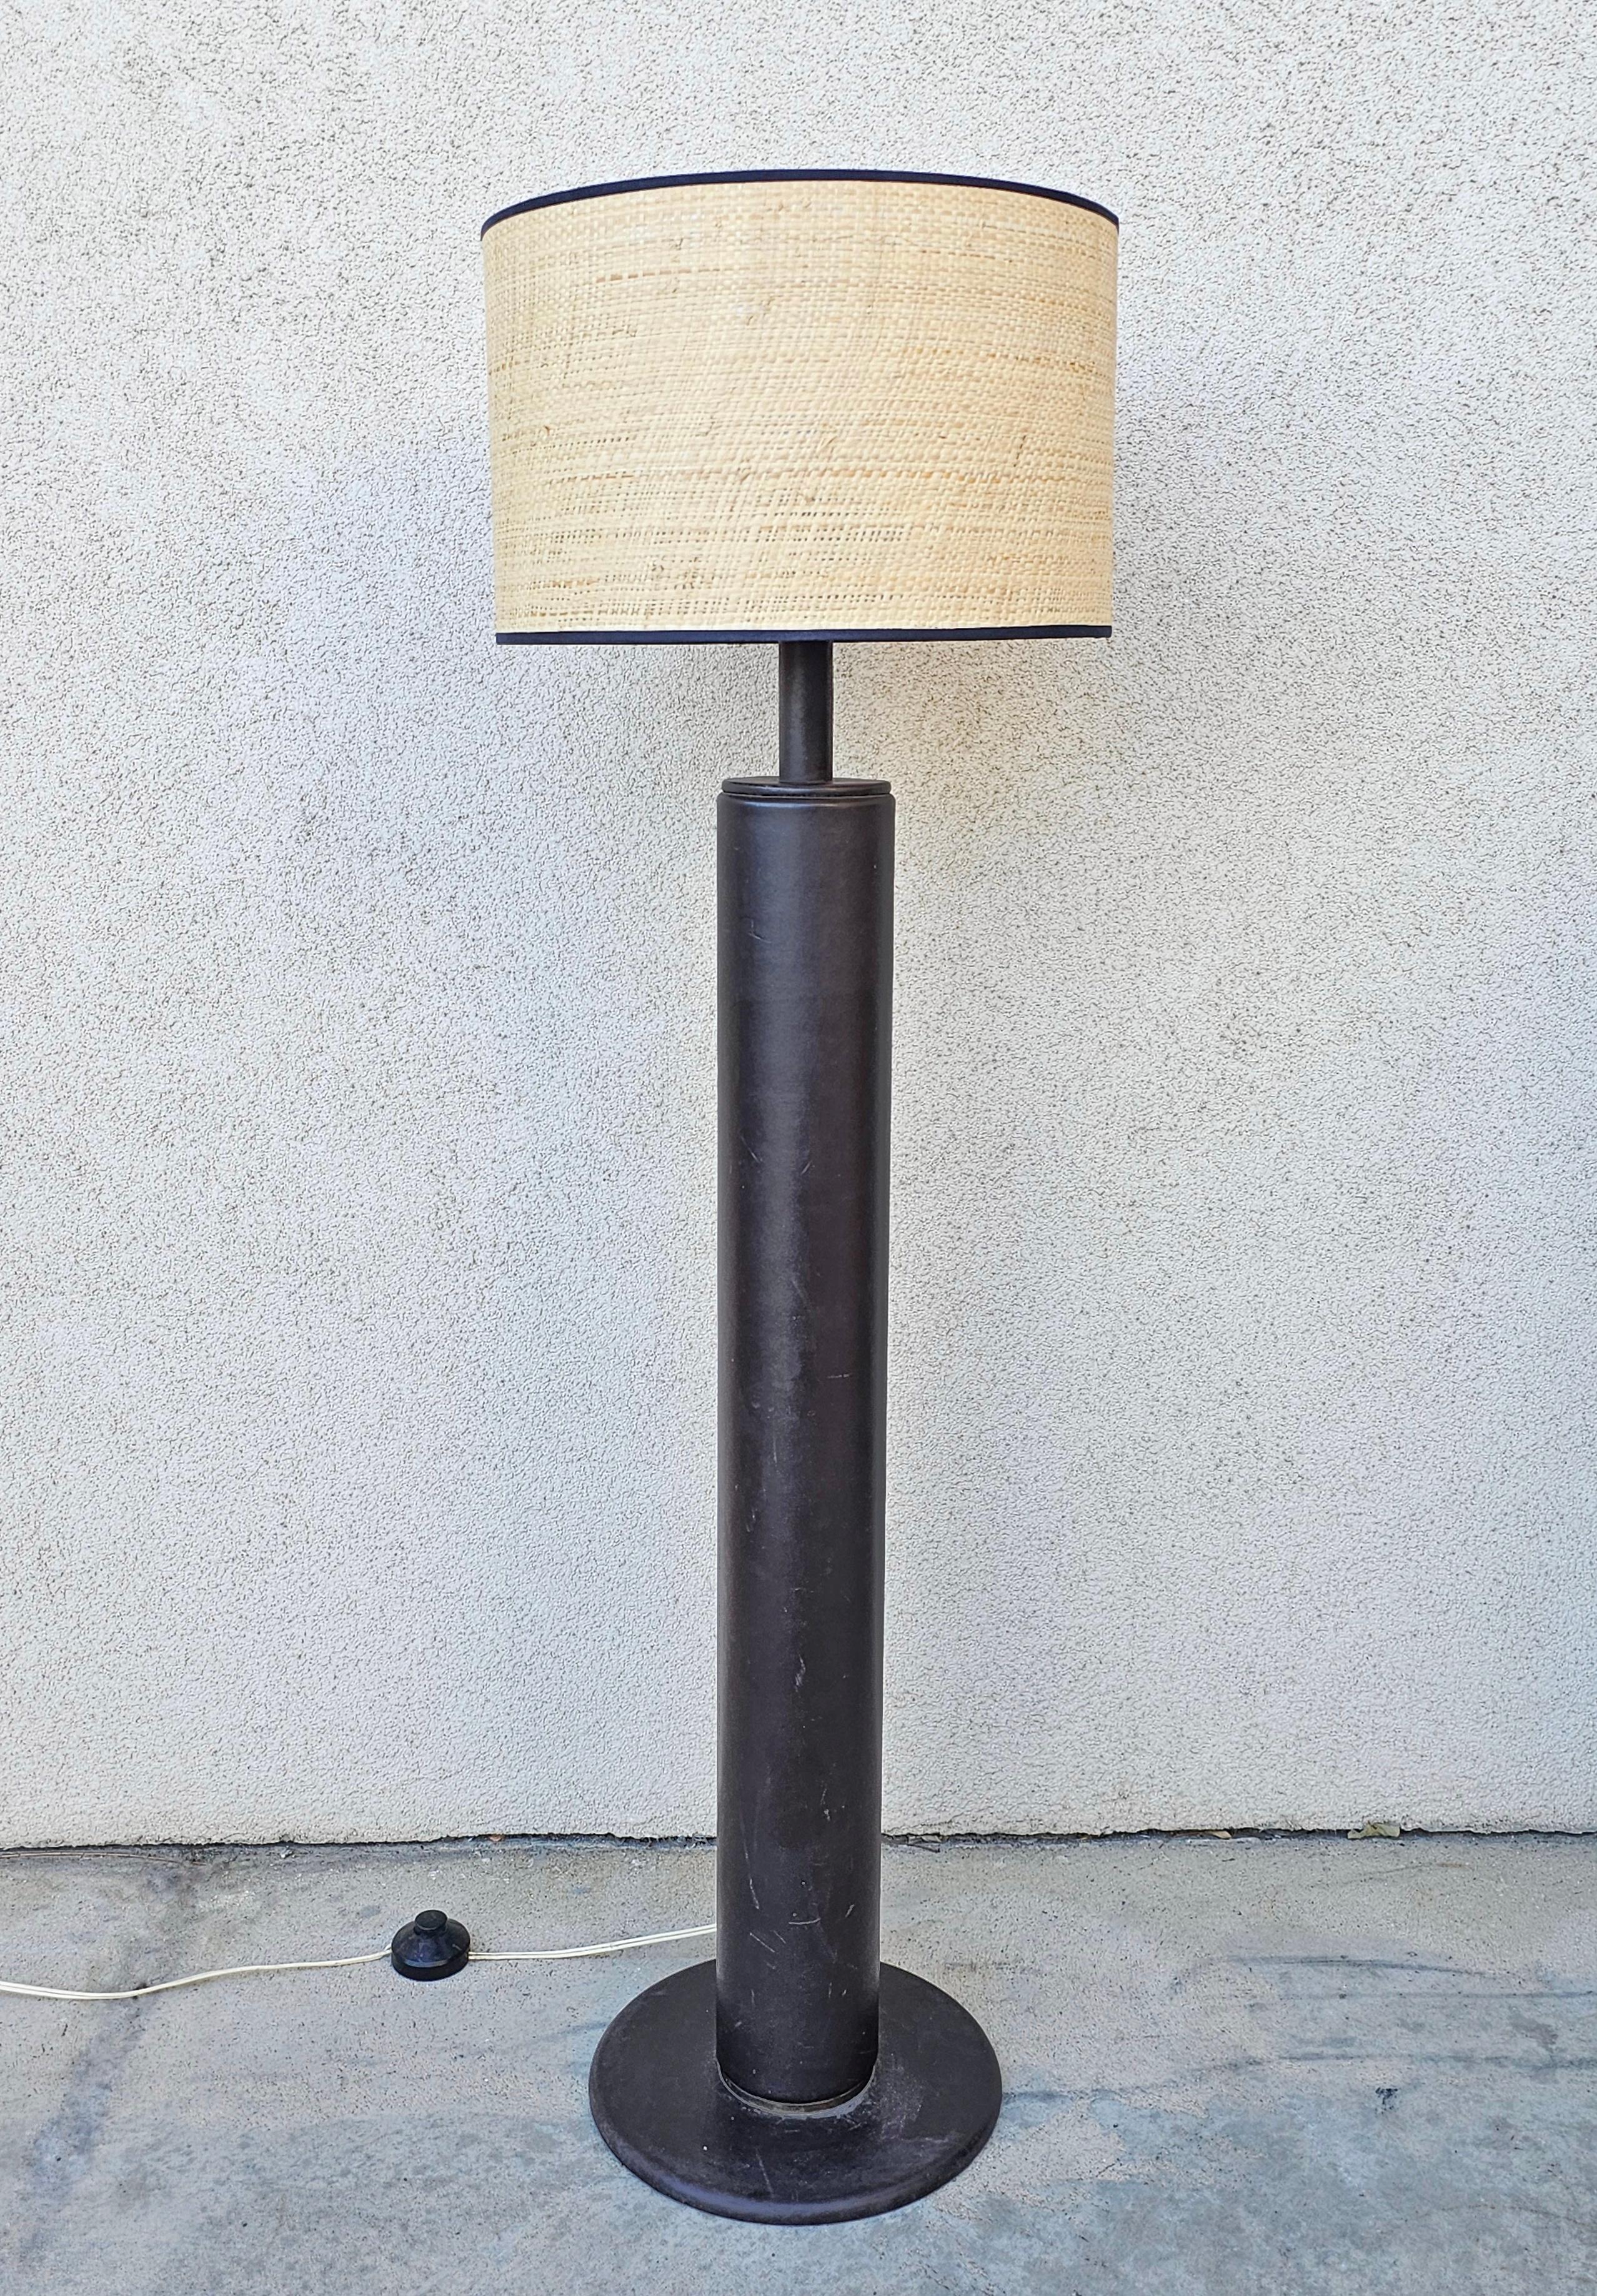 In this listing you will find a very uncommon Mid Century Modern floor lamp which is done in dark brown leather. It features a single light with a bulb model E27, available worldwide. The logo of the manufacturer is attached at the root of the